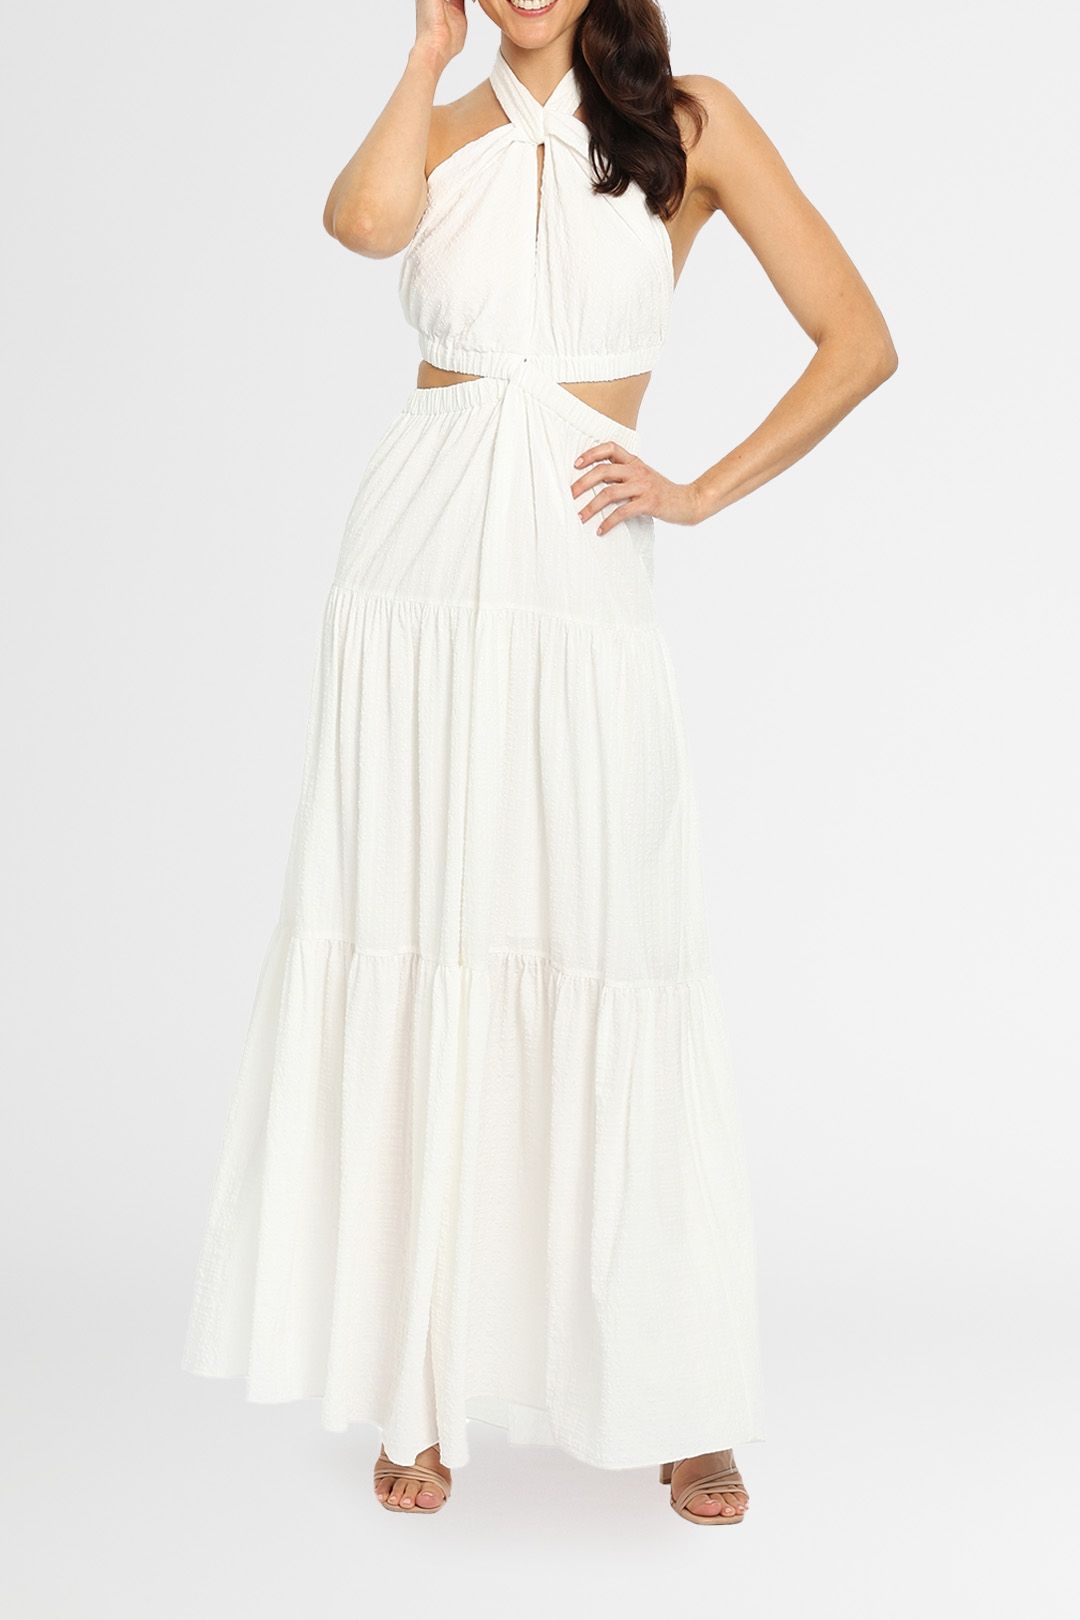 Significant Other Clementine Dress White